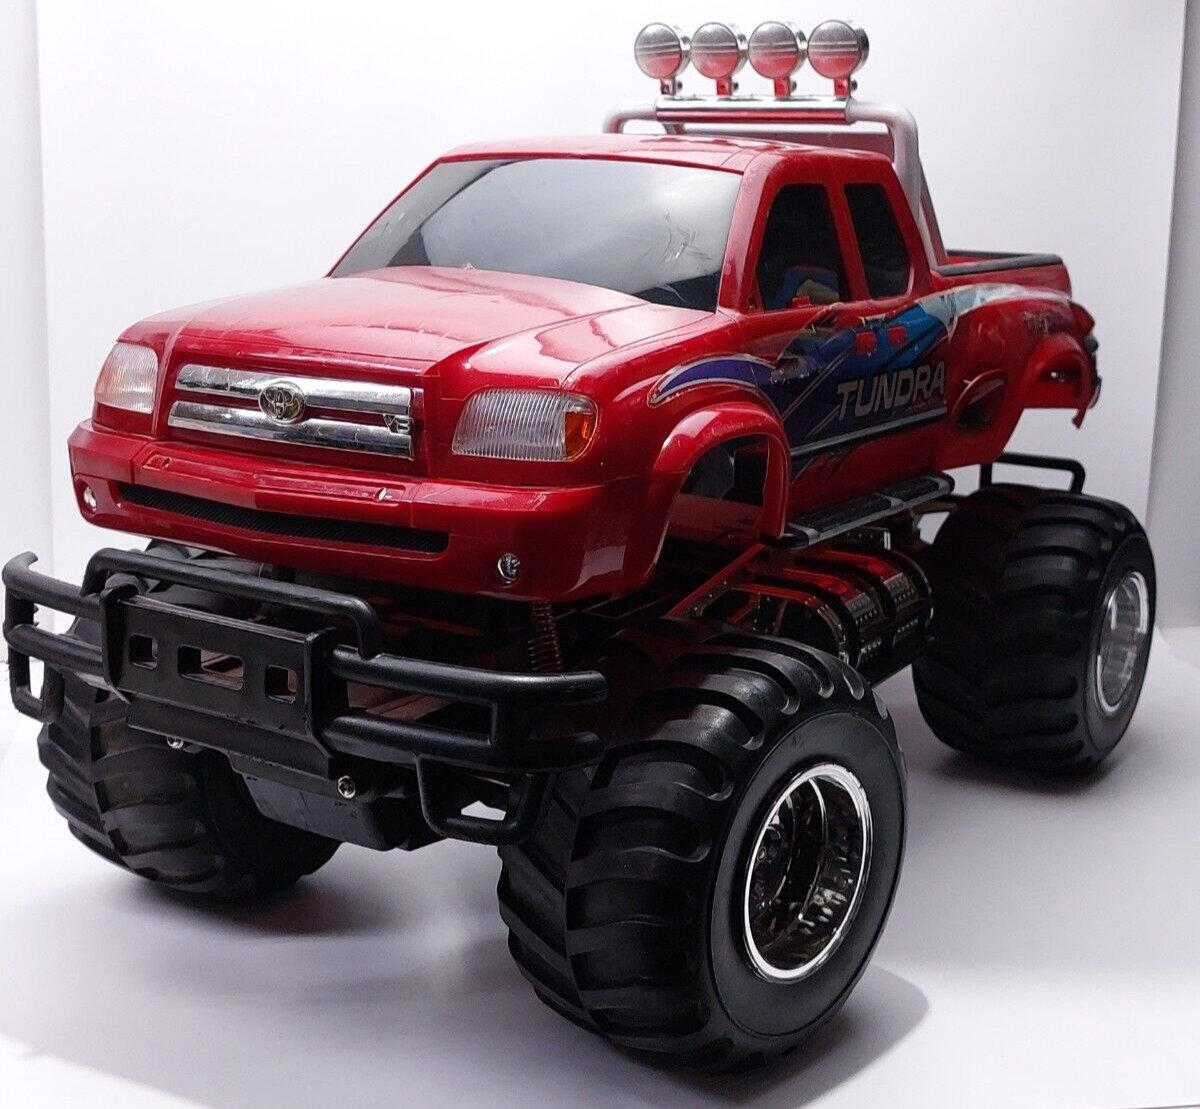 Primary image for Toyota Tundra RC Car Truck SUV Red 1/6 Scale Crawler Body Sector 7